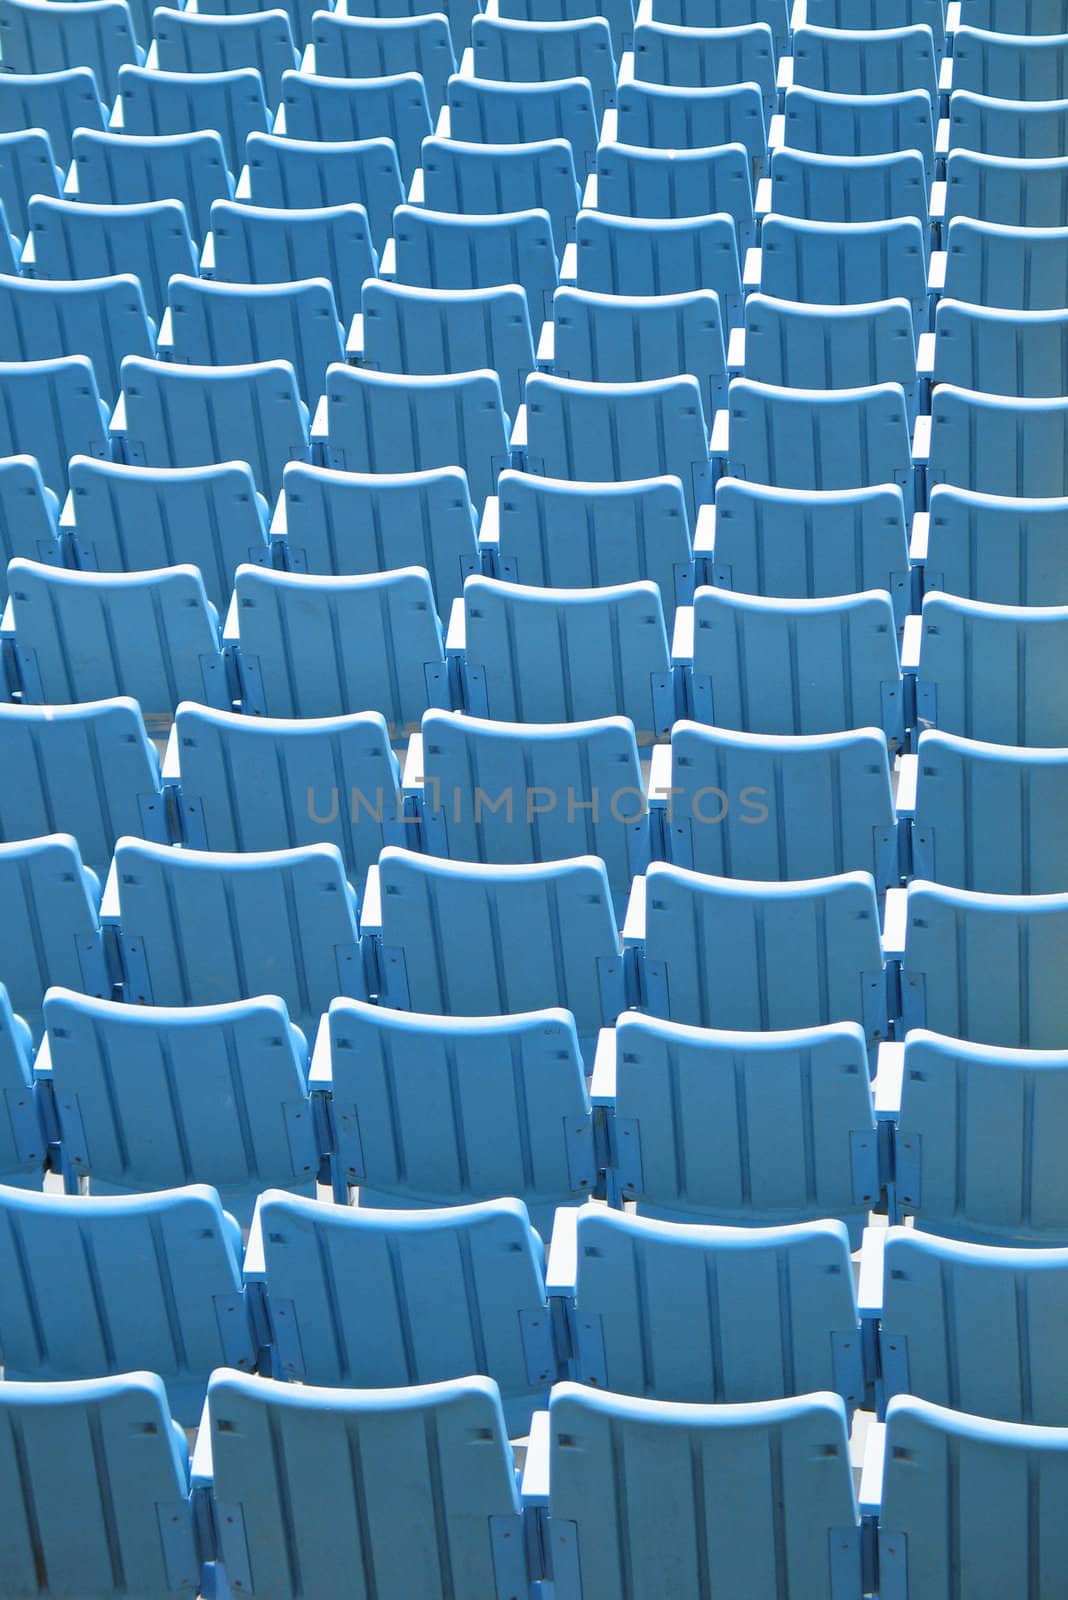 event seats by mmm